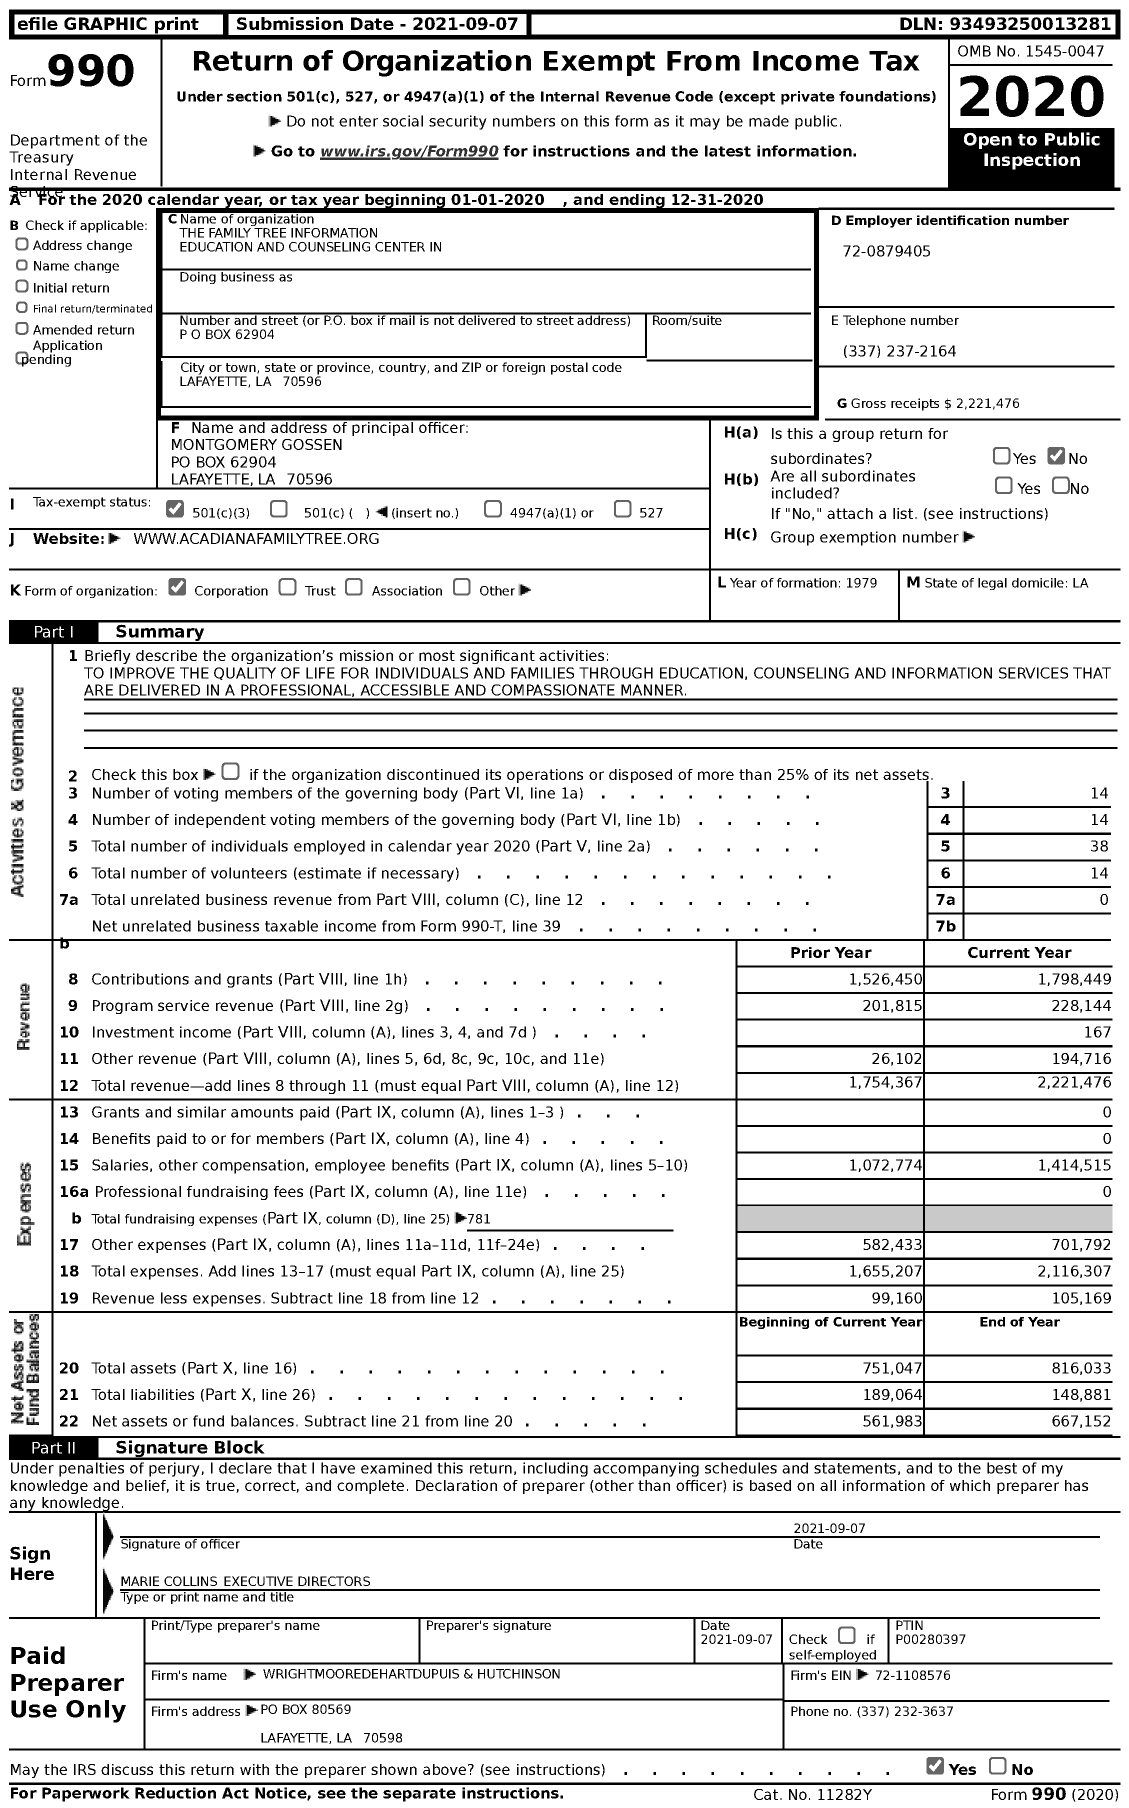 Image of first page of 2020 Form 990 for The Family Tree Information Education and Counseling Center in